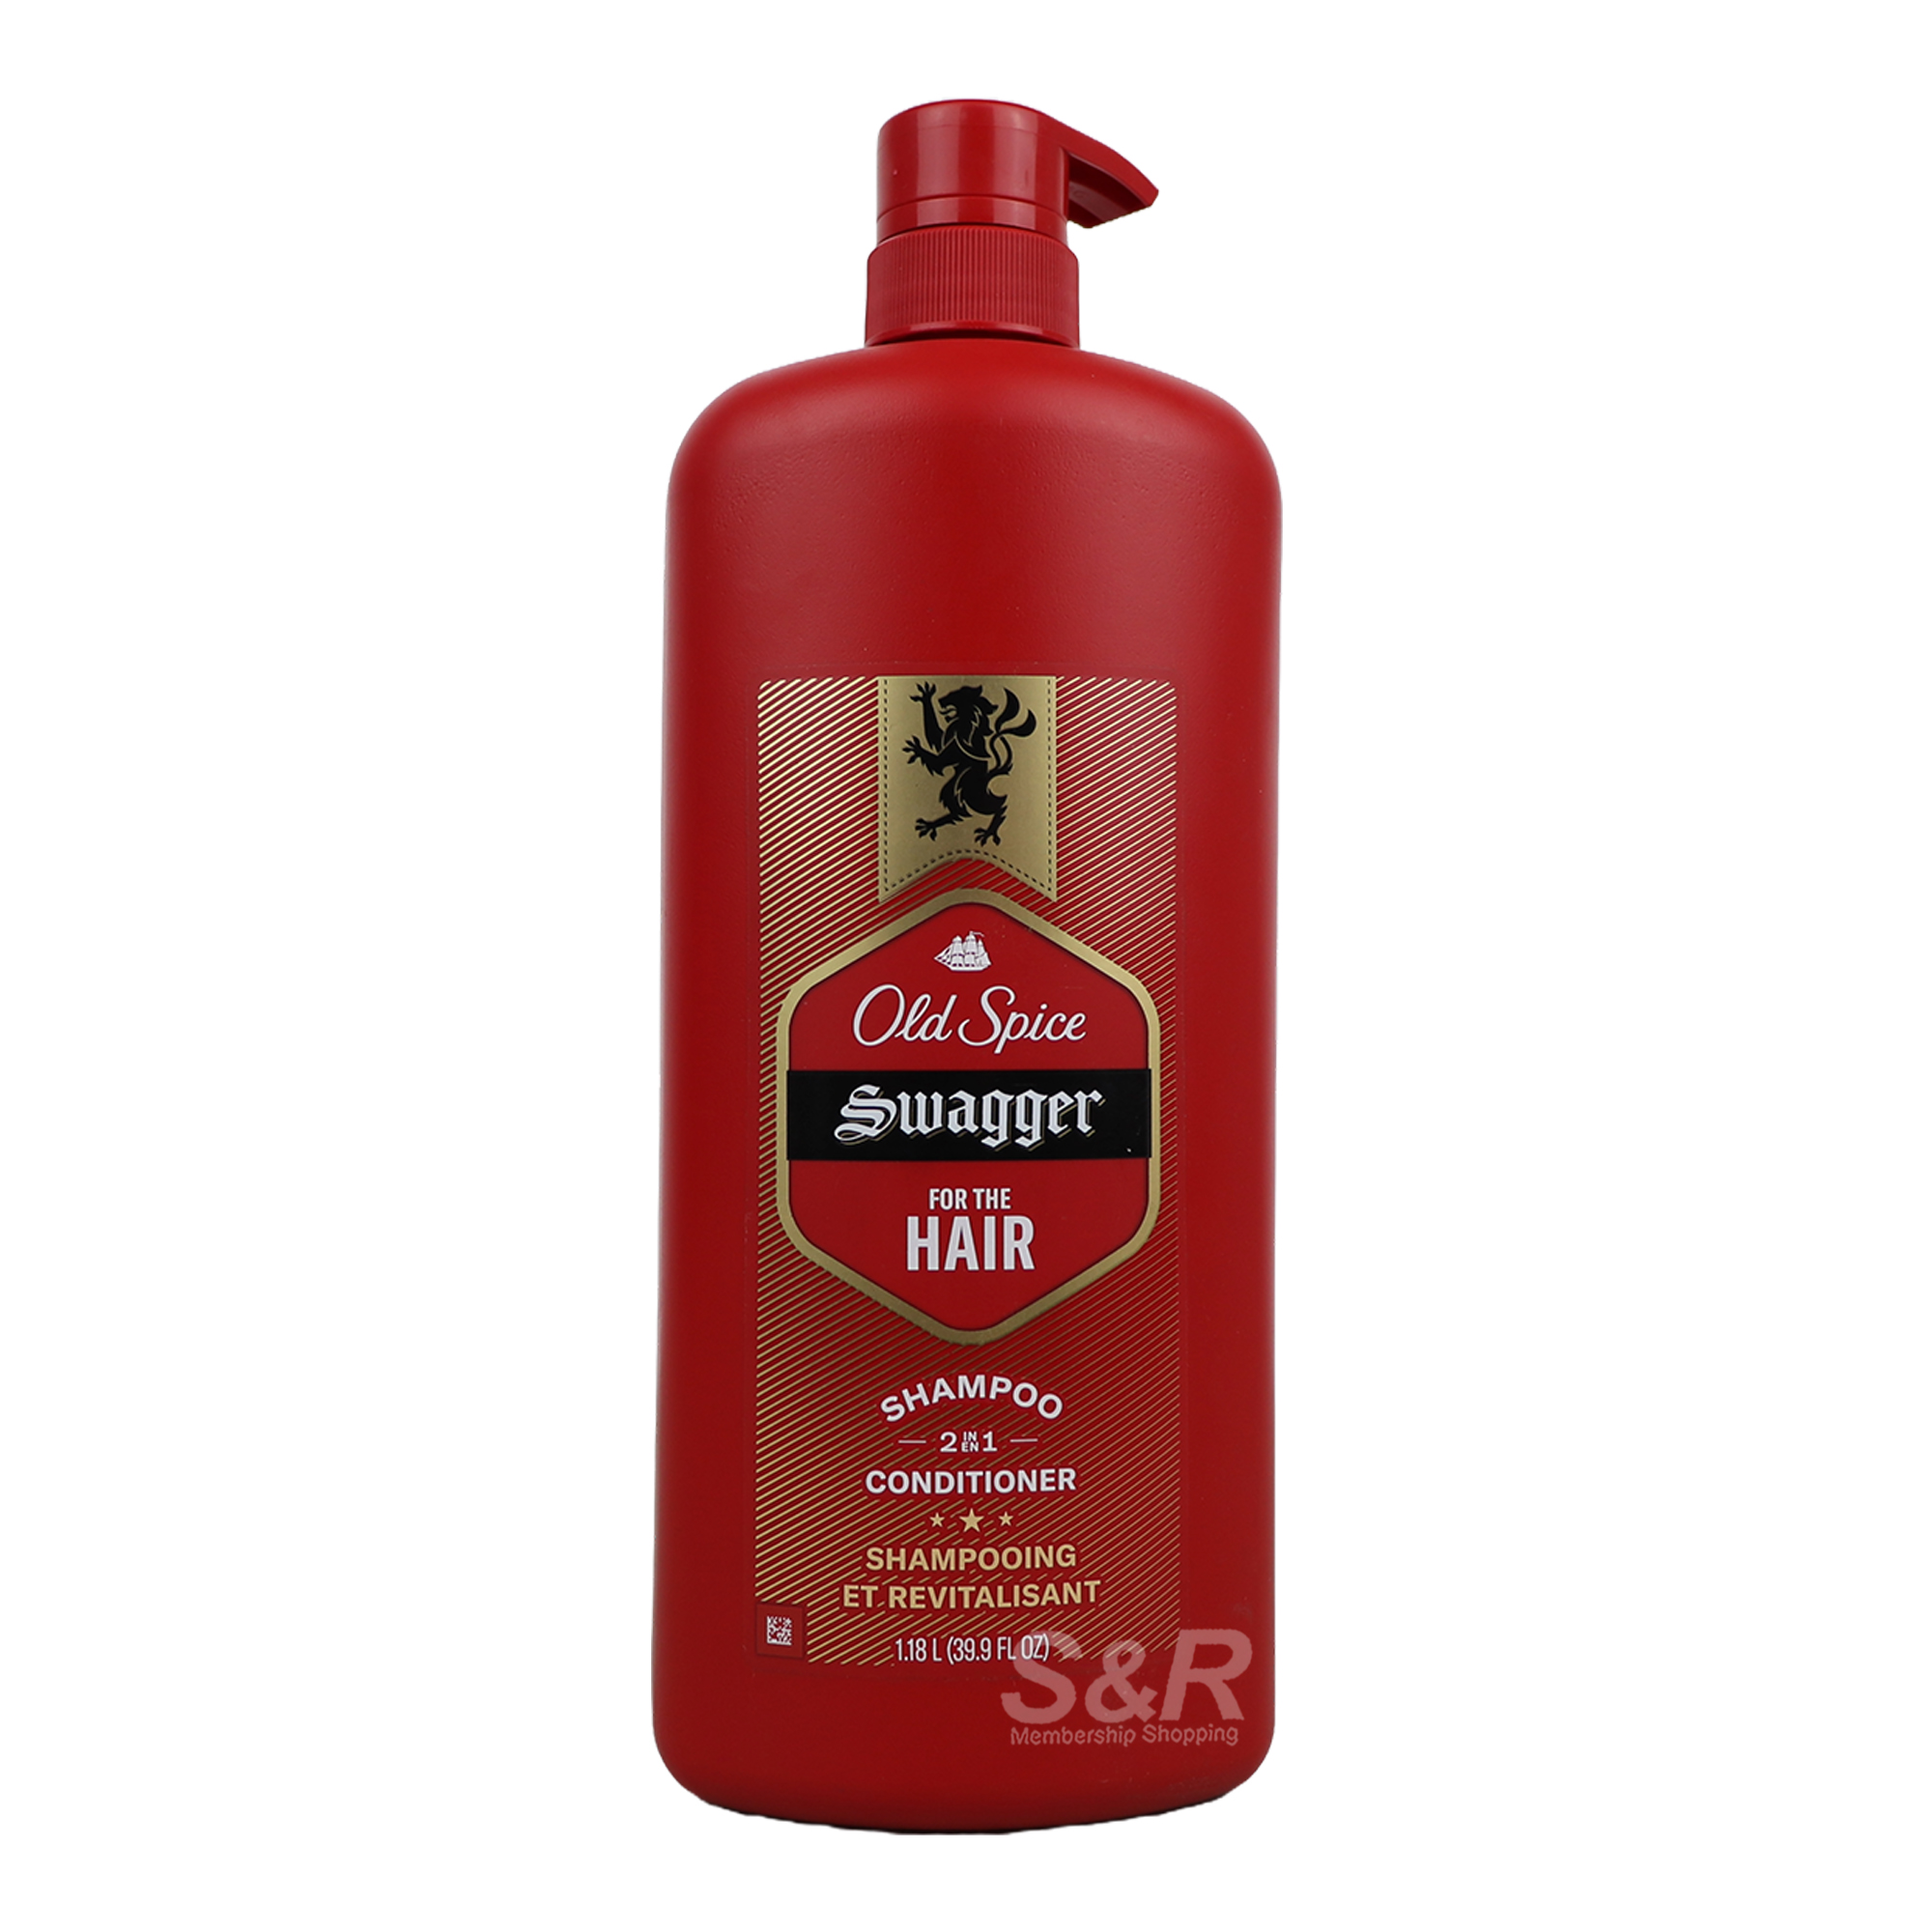 Old Spice Swagger 2 in 1 Shampoo 1.18L